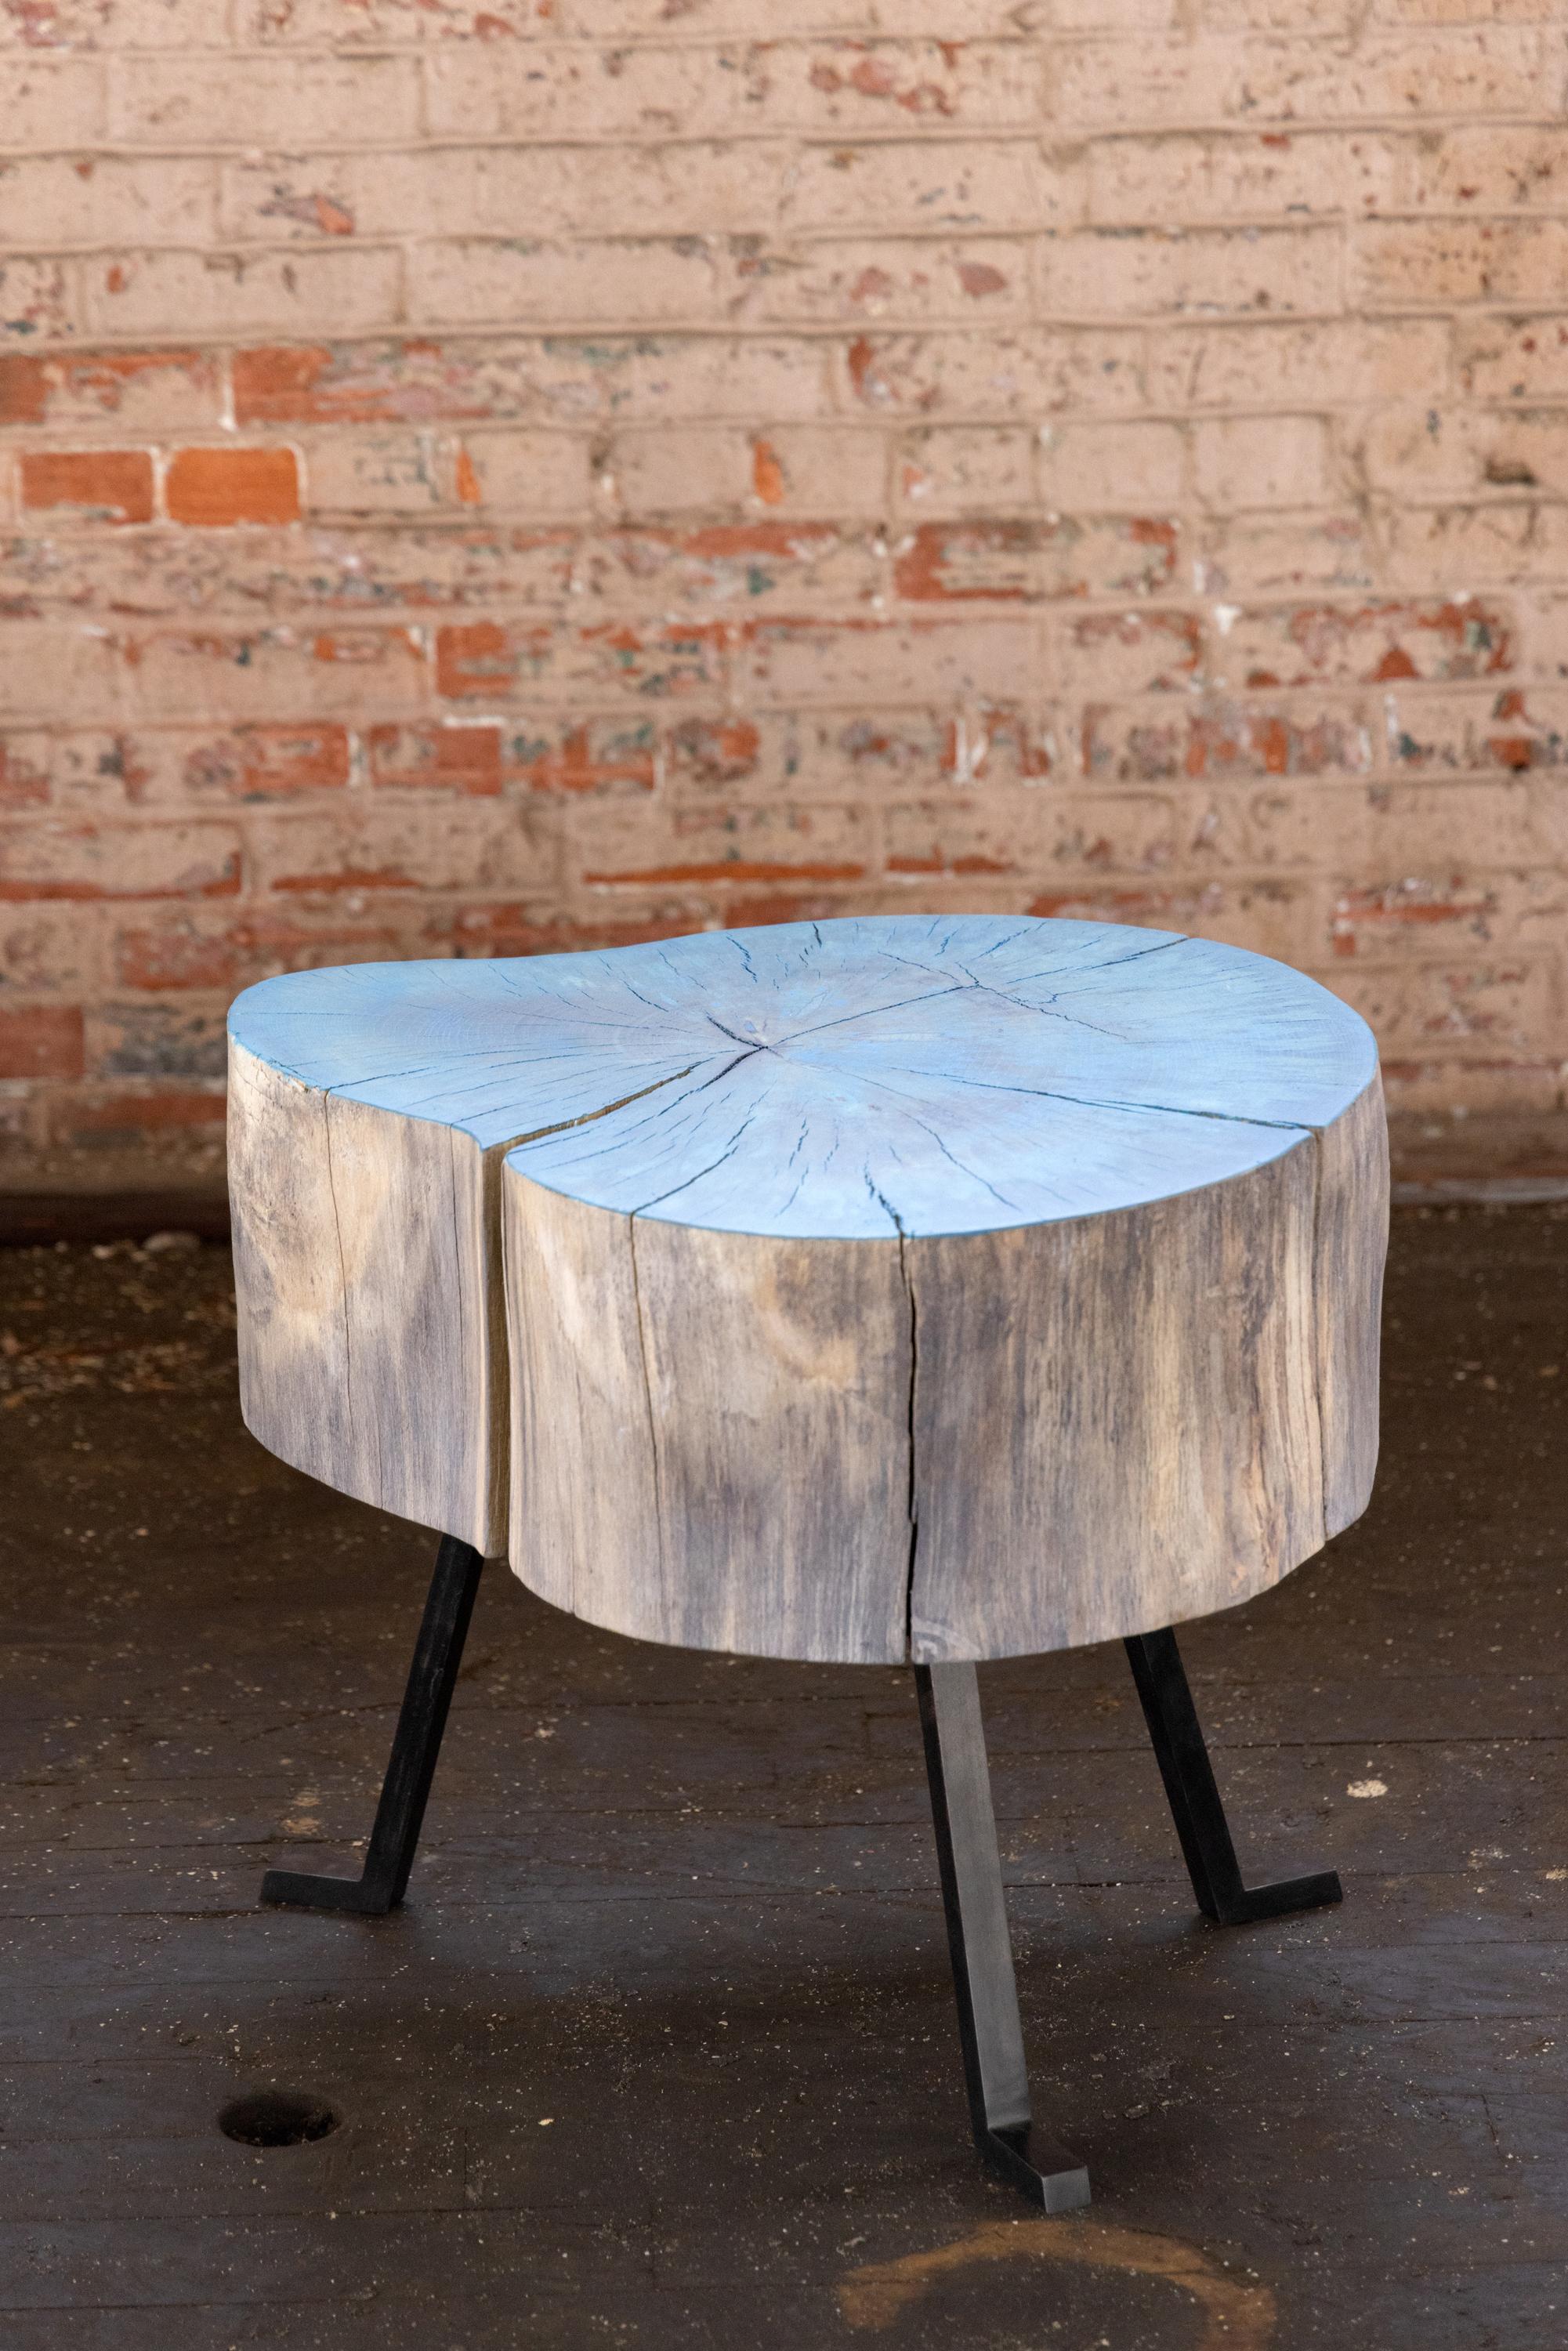 This live edge round side Table is an occasional table, a coffee table, or a side table. We call it the Sputnik table. It is certainly irregular and that’s why you’ll love it. The three metal legs attached to live edge piece timber evoke the